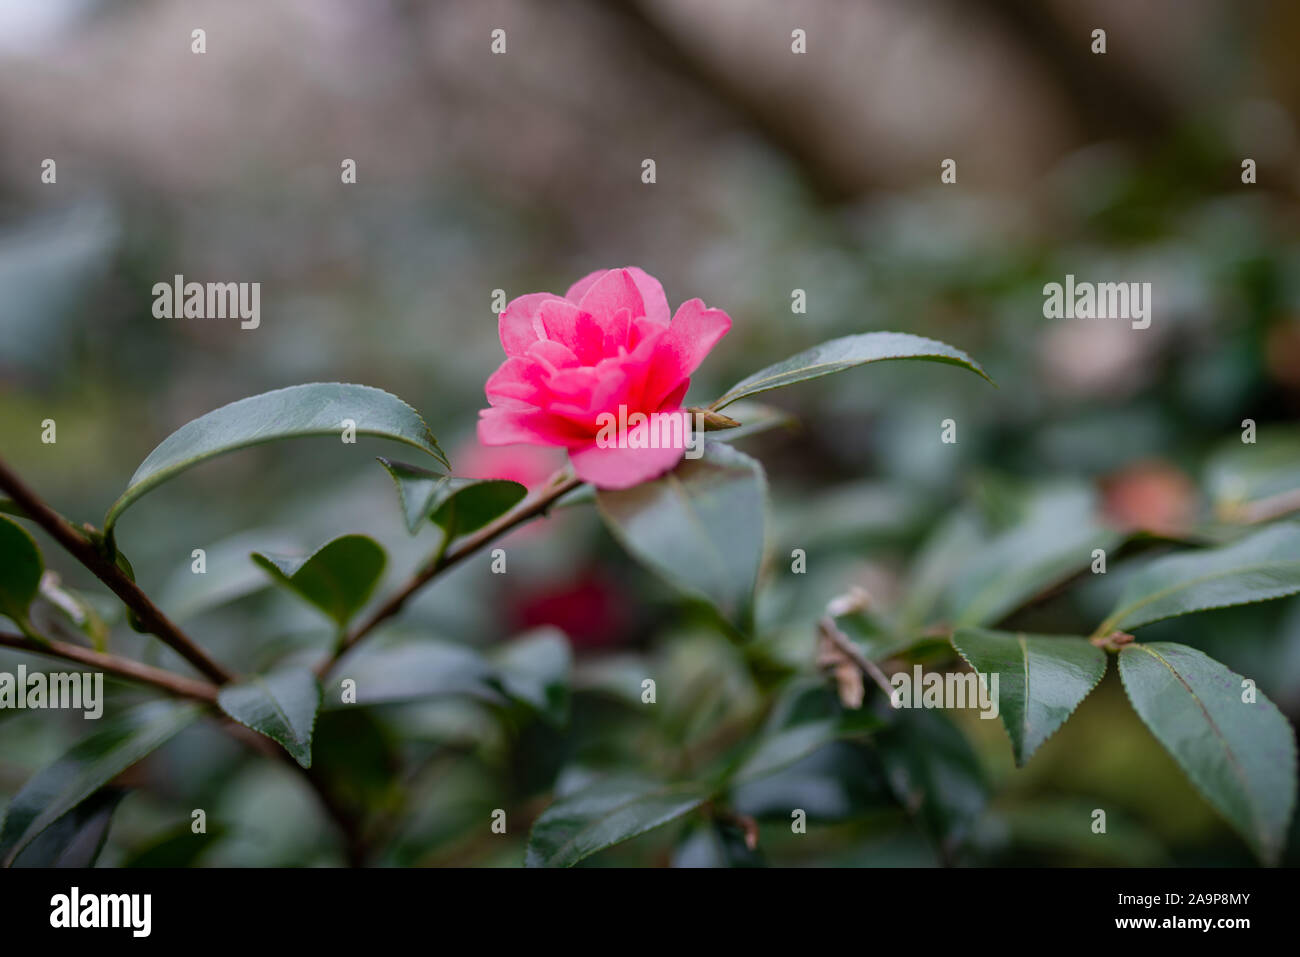 One dark pink camelia flower on a blurred background, taken during an overcast afternoon in Kyoto, Japan Stock Photo